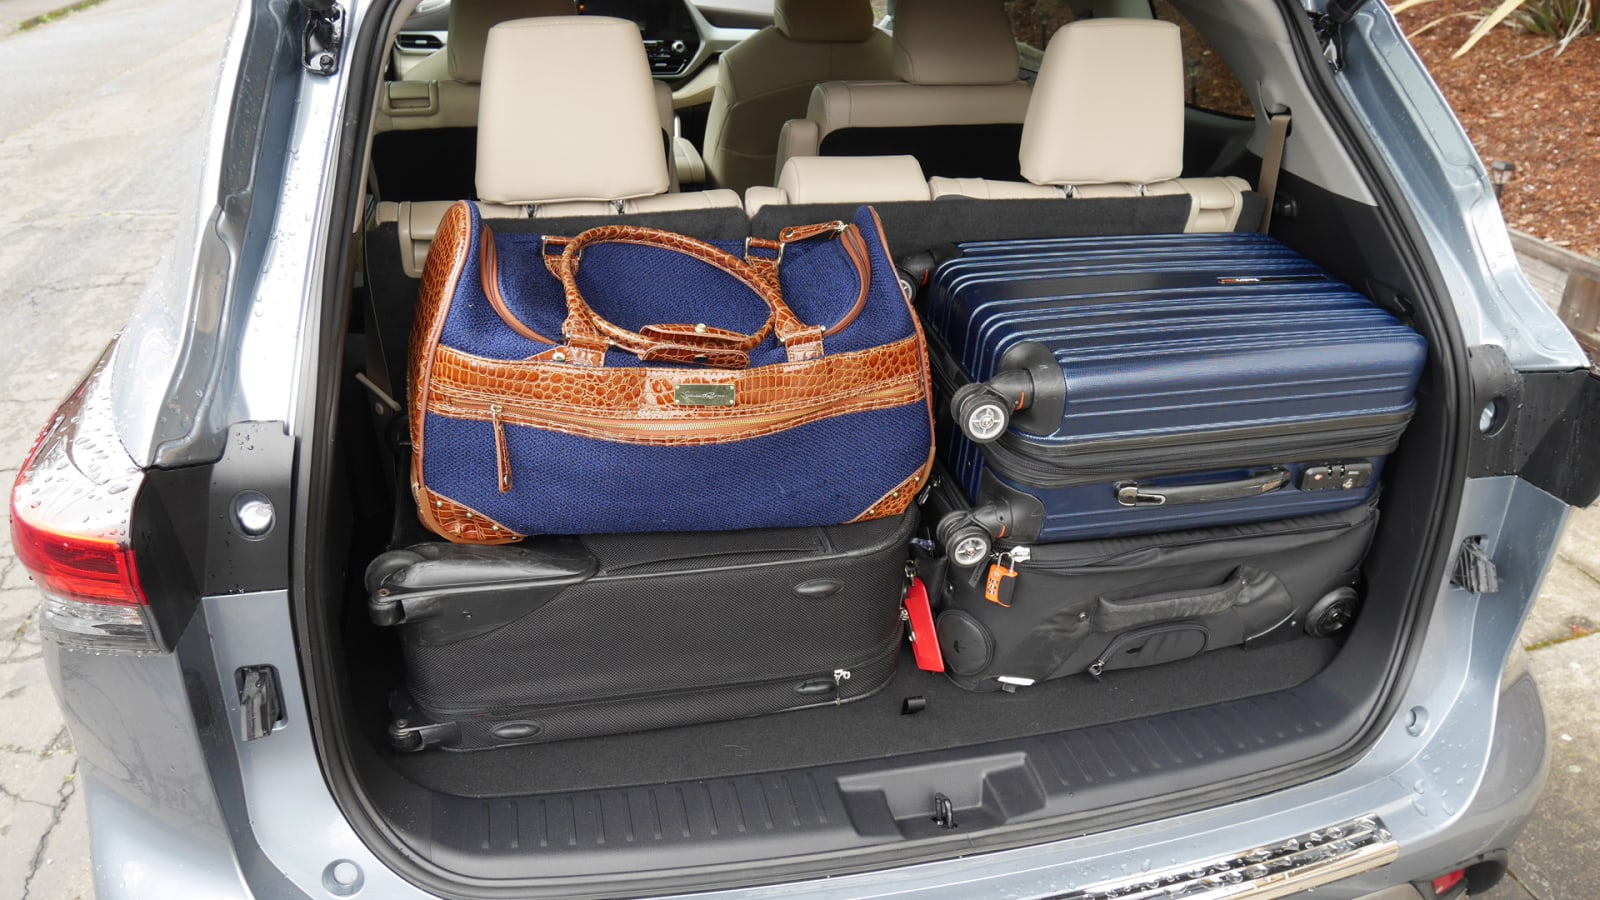 Toyota Highlander Cargo Space with Seats Up and Down